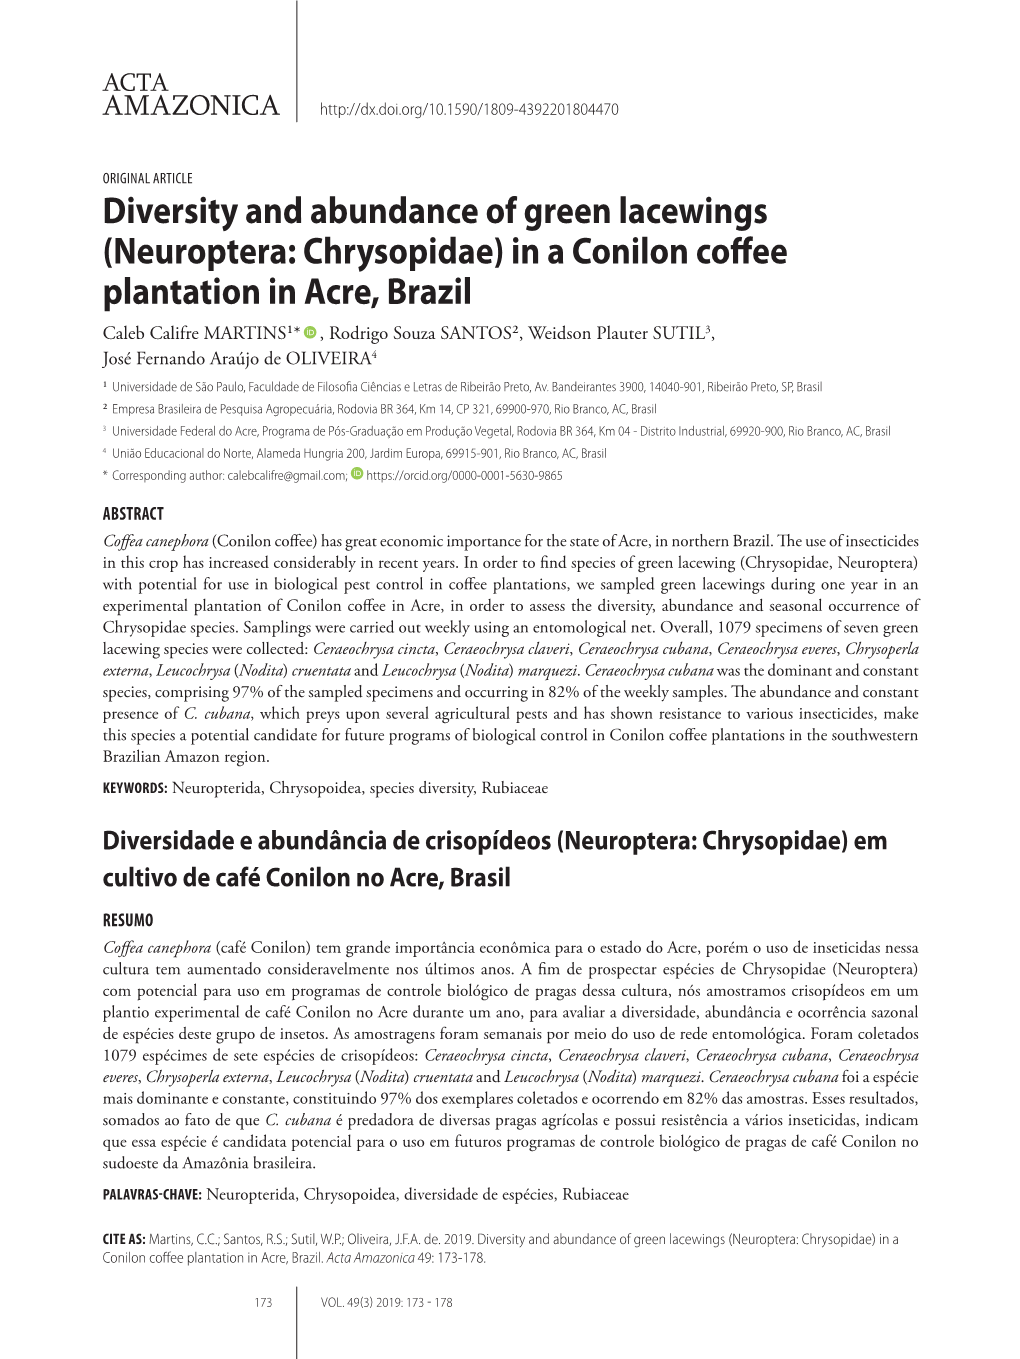 Diversity and Abundance of Green Lacewings (Neuroptera: Chrysopidae)